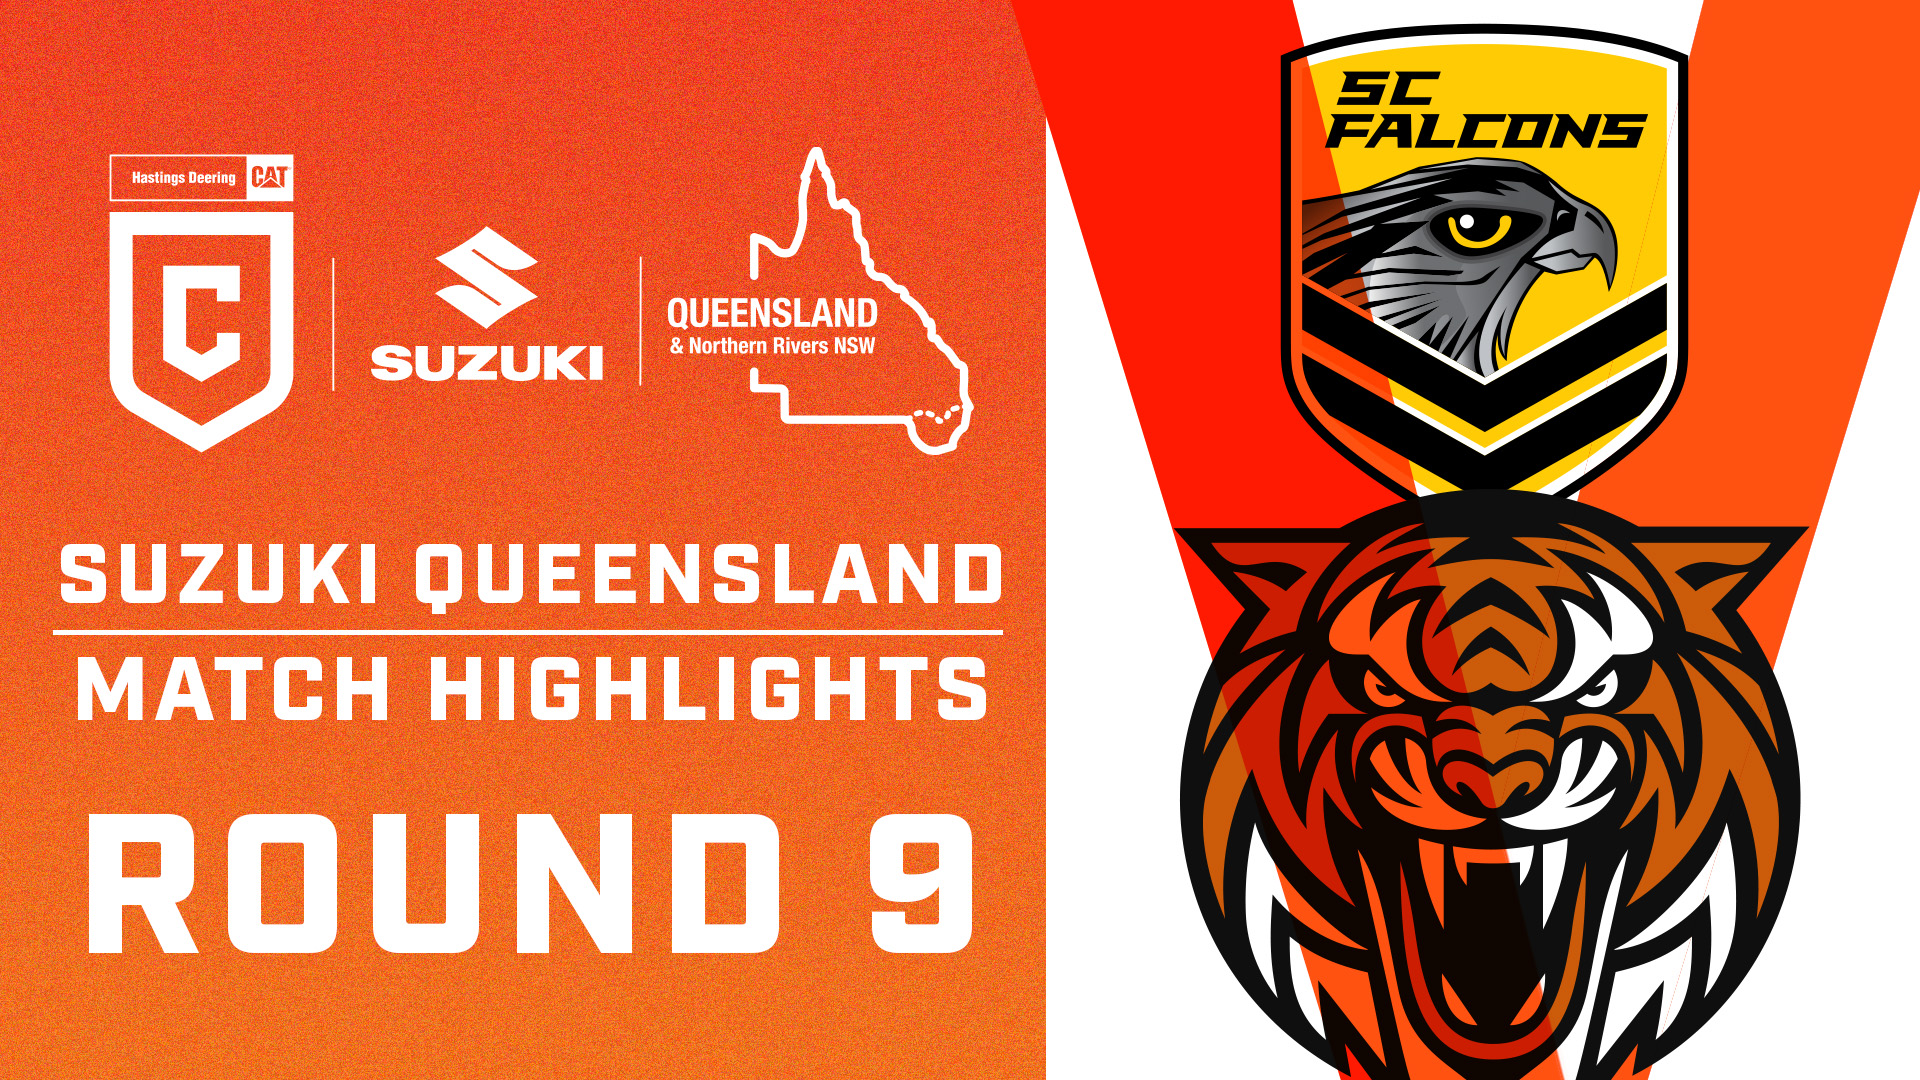 Suzuki Match Highlights from Round 9 Hastings Deering Colts Brisbane Tigers v SC Falcons